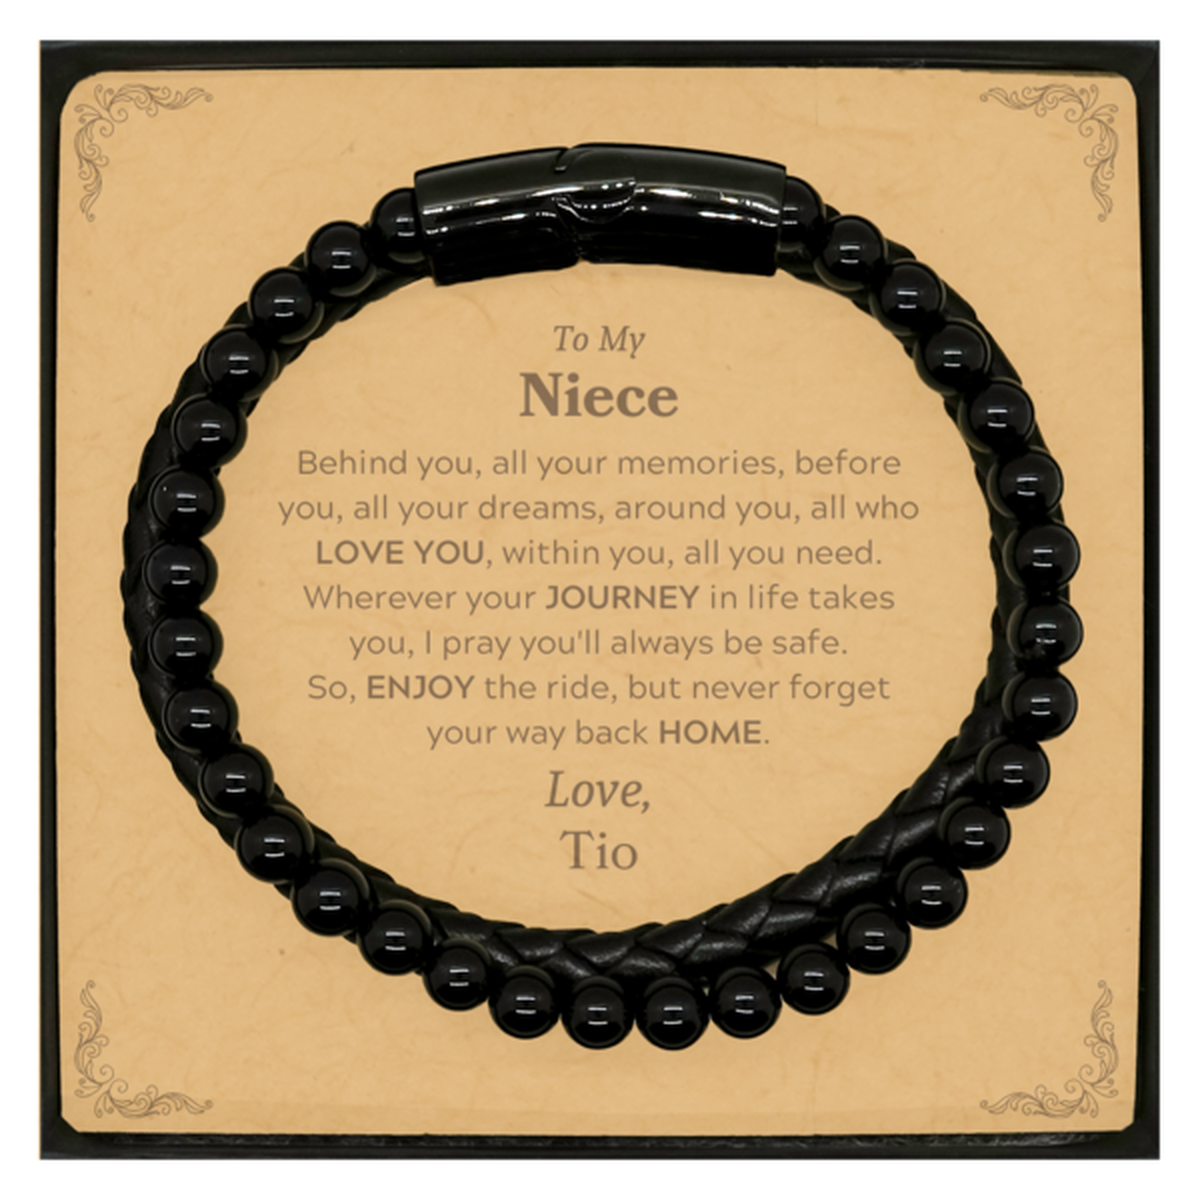 To My Niece Graduation Gifts from Tio, Niece Stone Leather Bracelets Christmas Birthday Gifts for Niece Behind you, all your memories, before you, all your dreams. Love, Tio